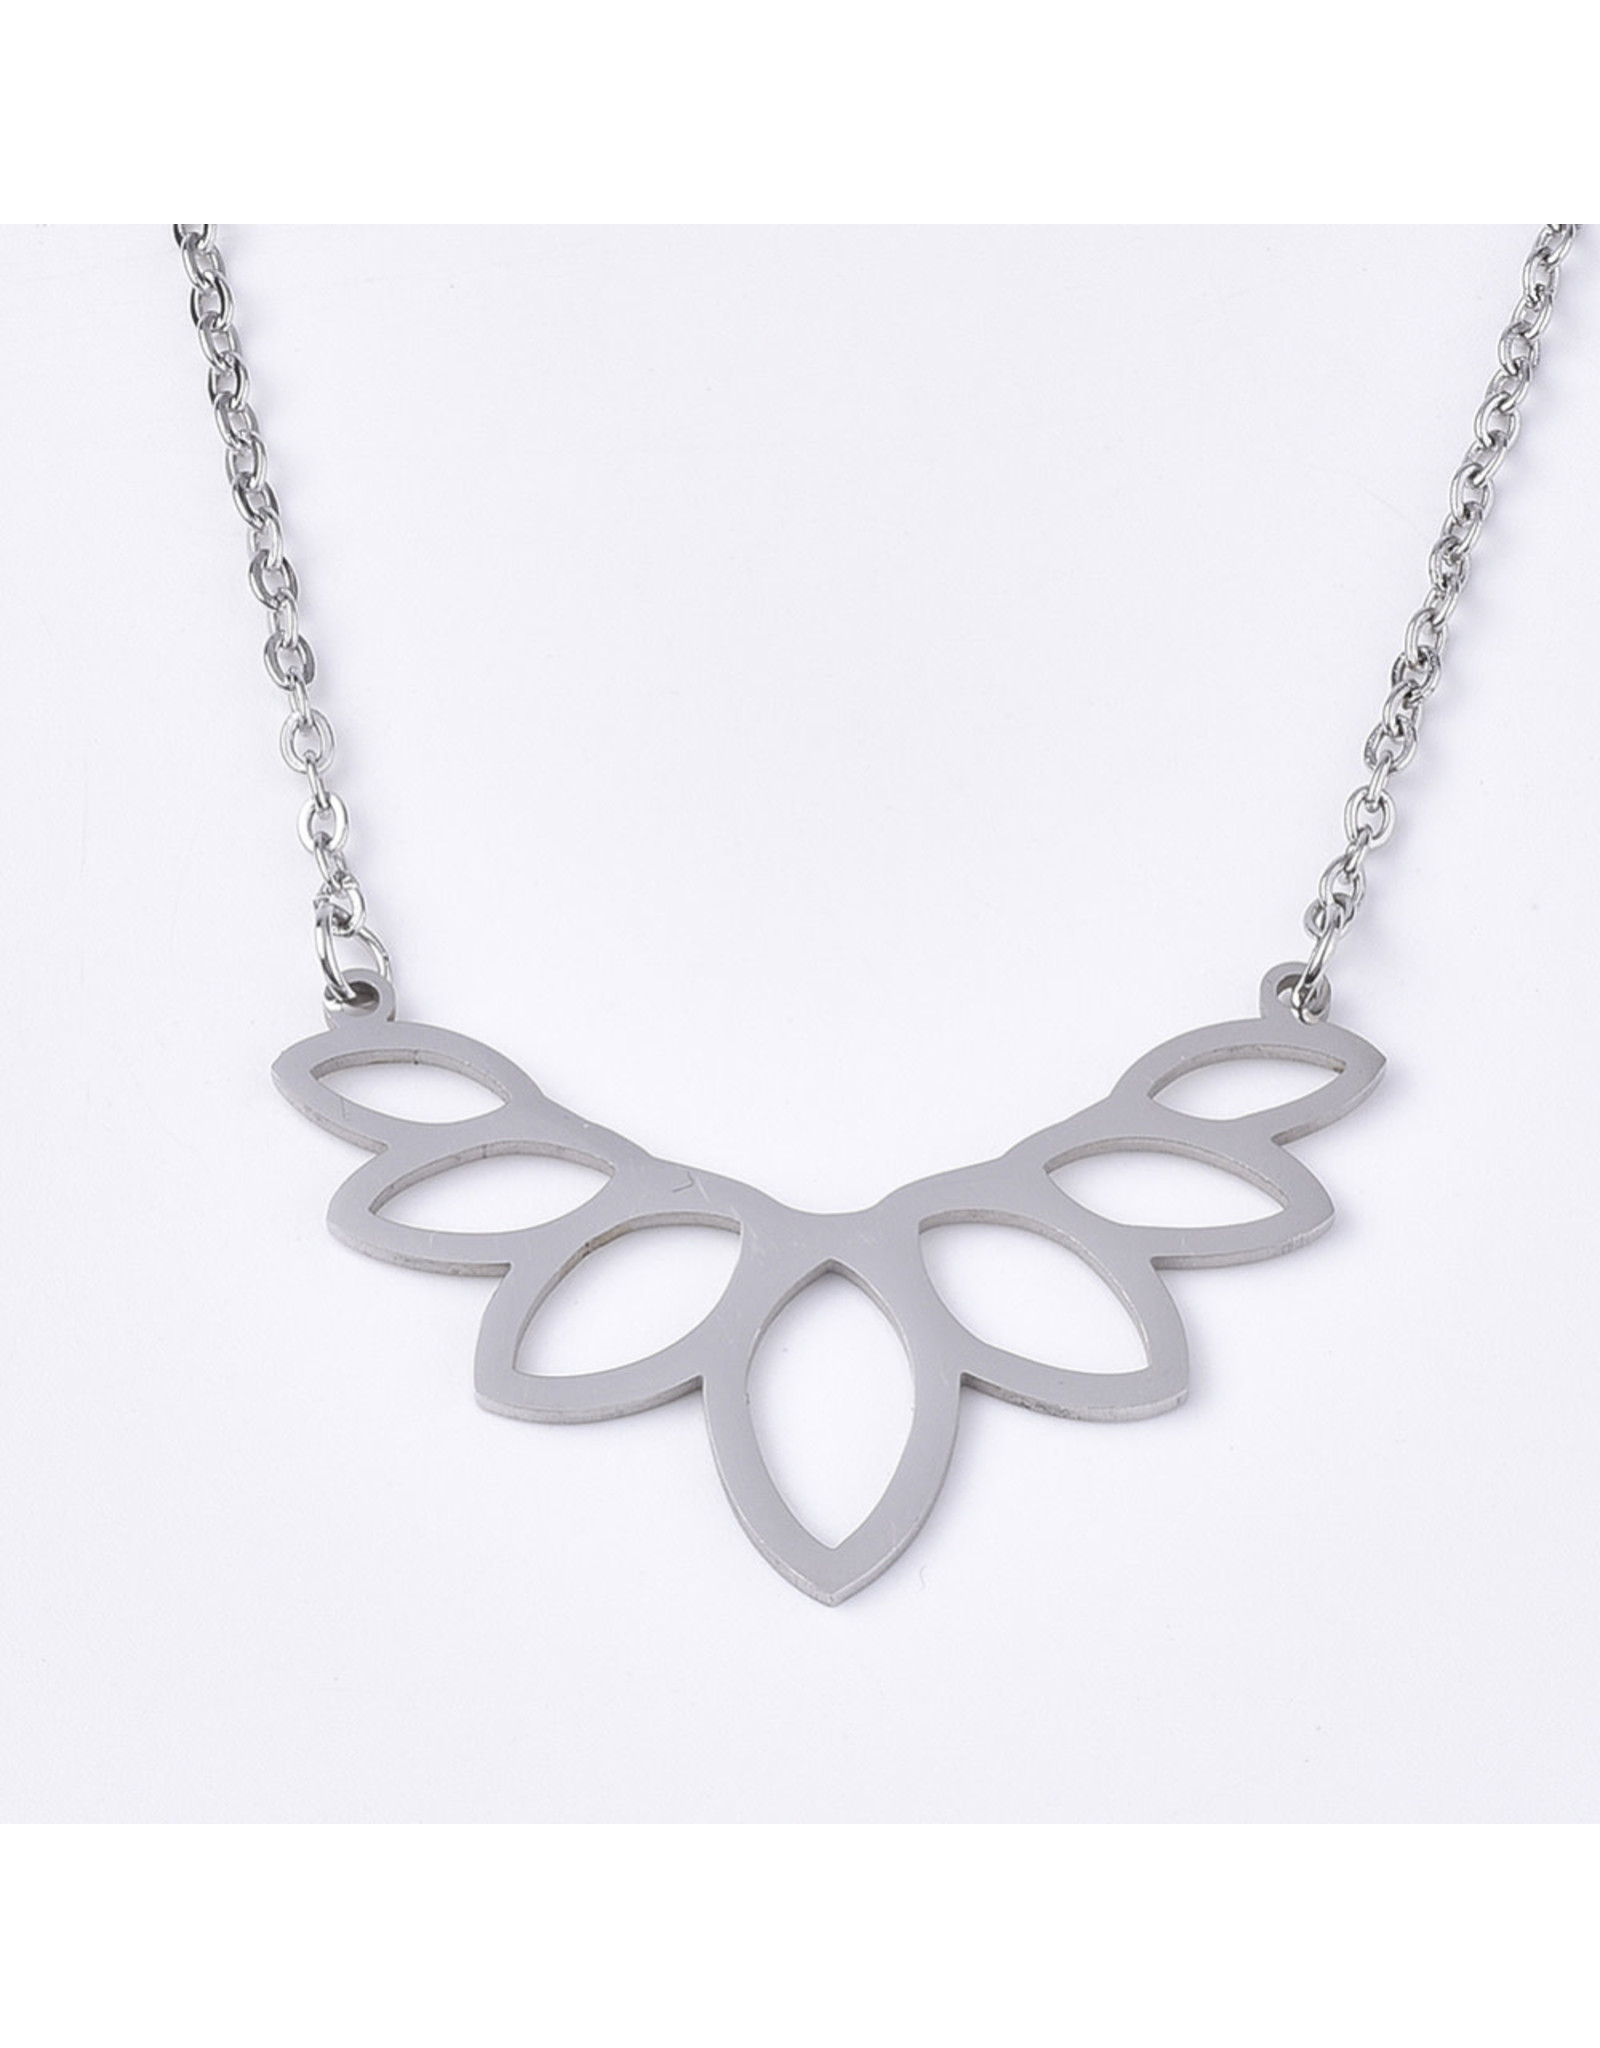 Lotus  Necklace  Stainless Steel   25x40mm  18'' x1